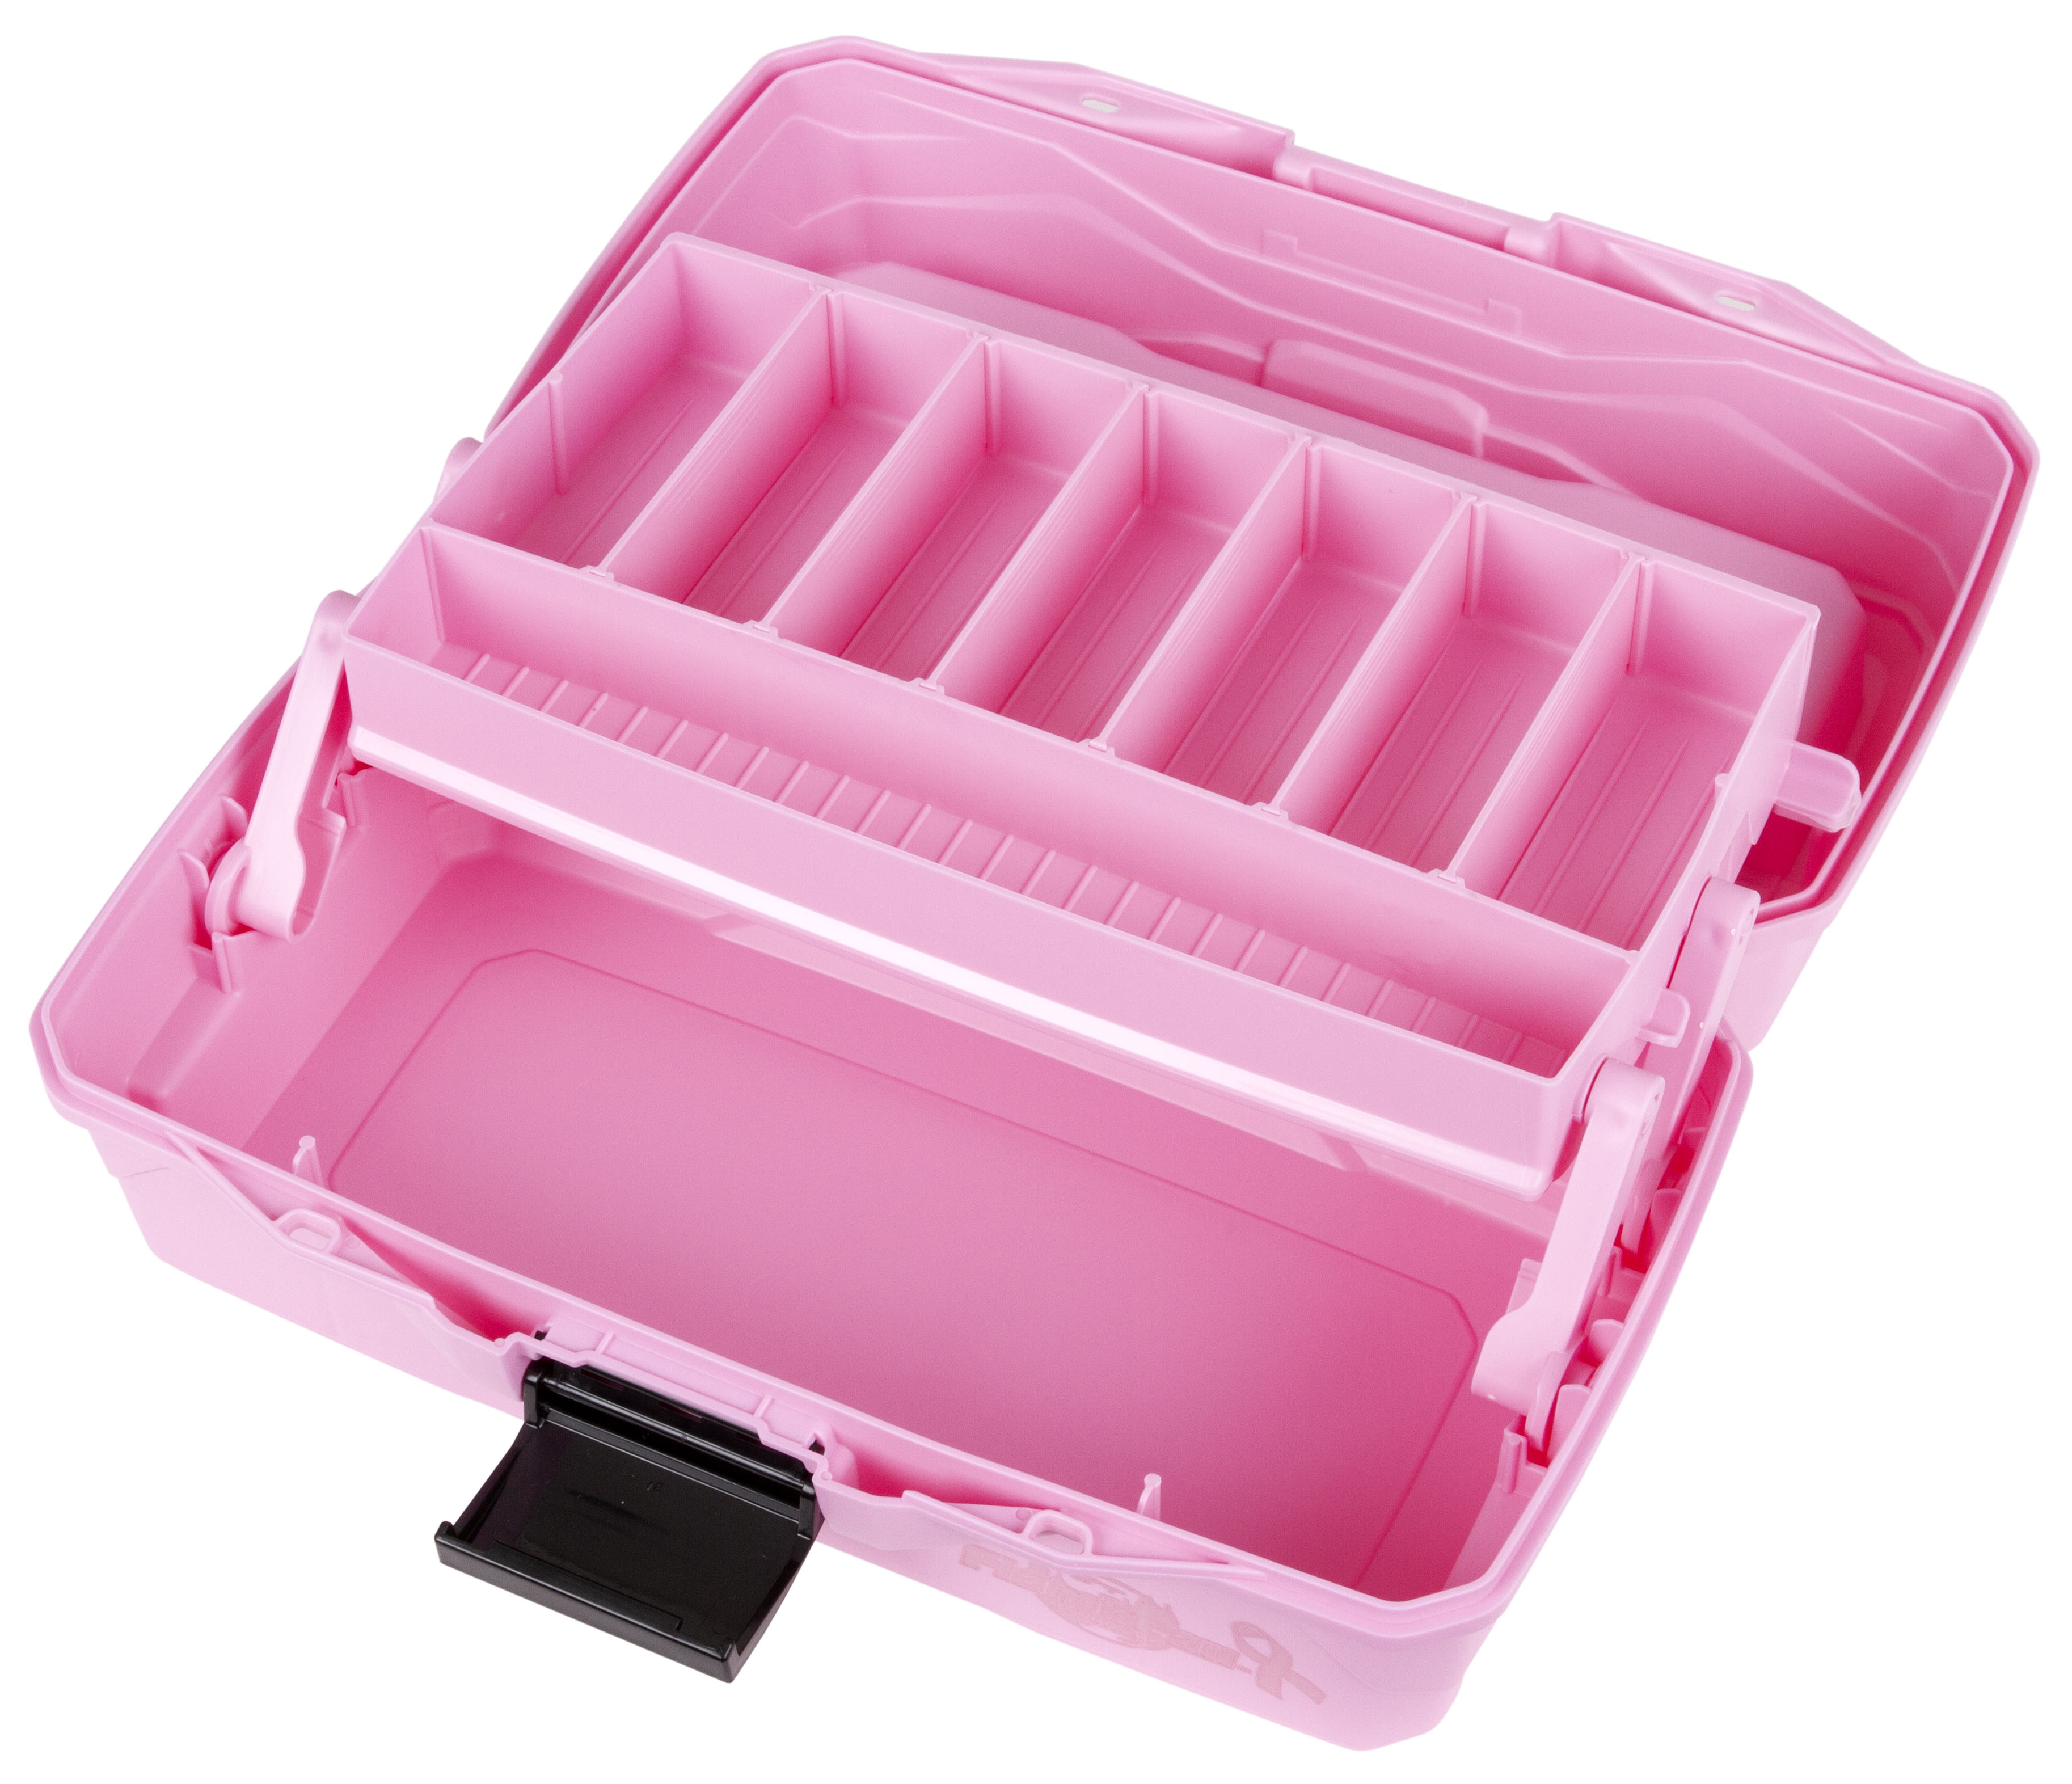 Flambeau Outdoors 6391PR 1-Tray Classic Tray Pink Ribbon Tackle Box,  Portable Tackle Storage - Pink Breast Cancer Support Edition